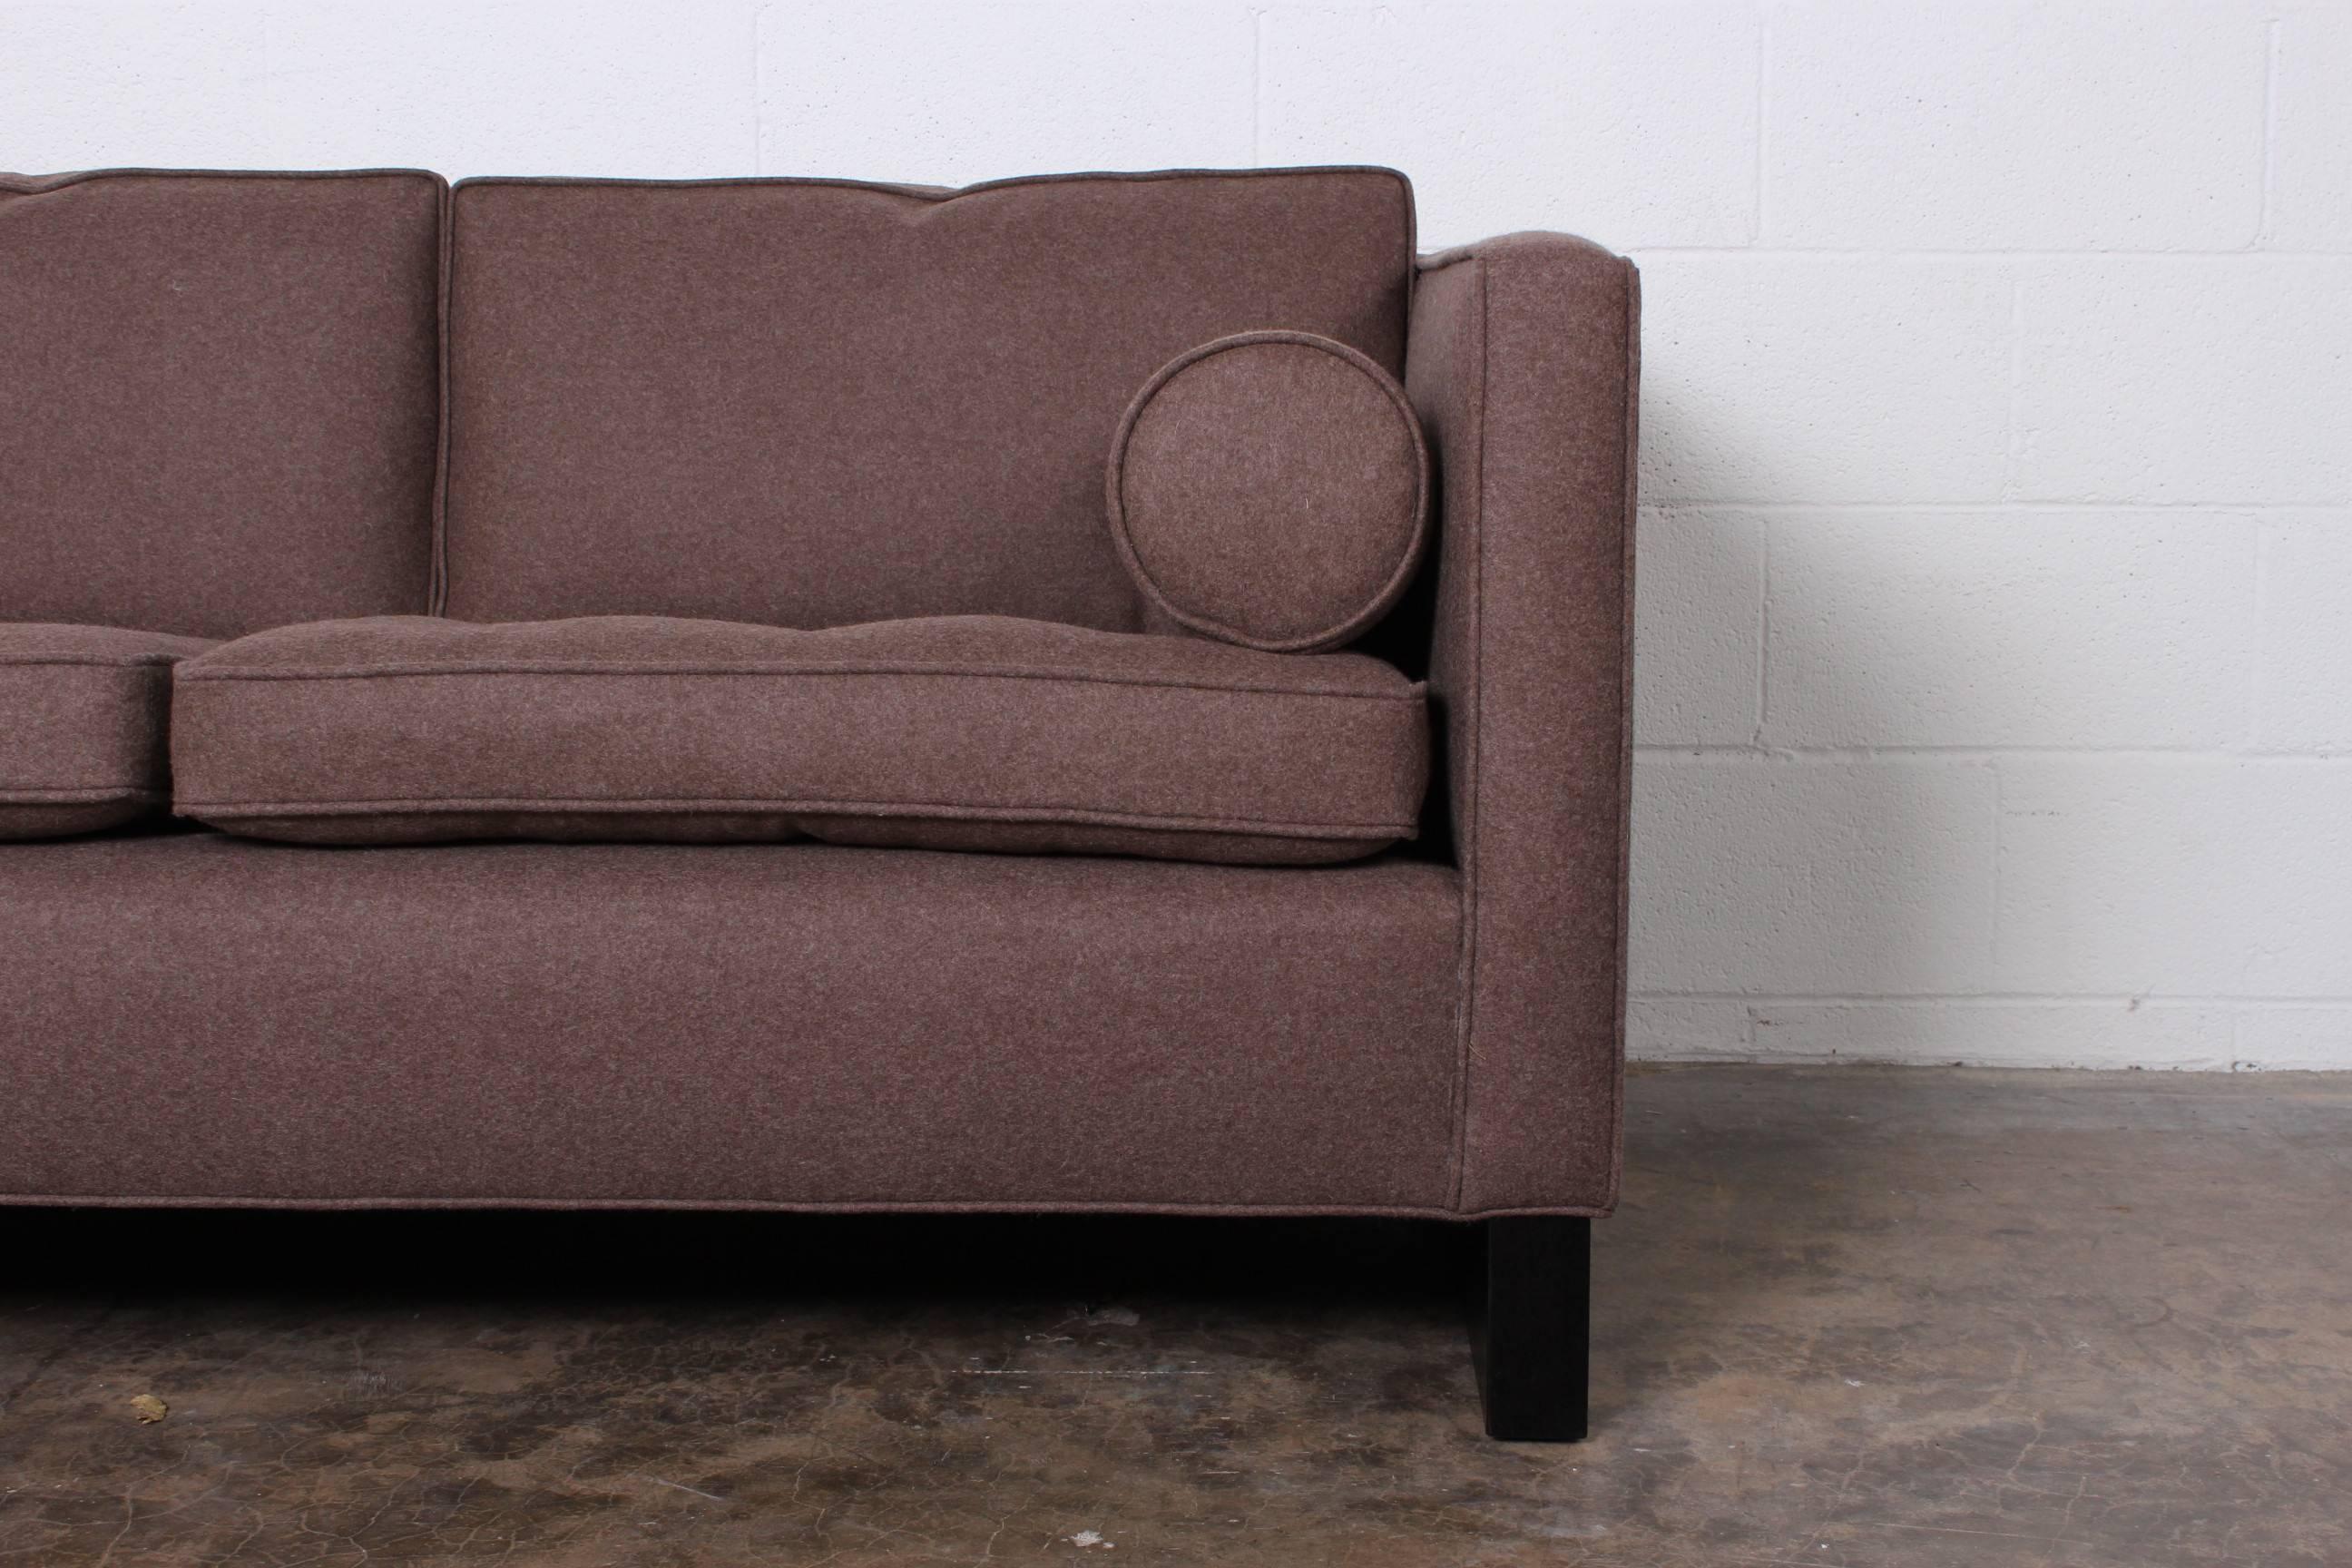 Sofa Designed by Mies Van Der Rohe for Knoll In Excellent Condition For Sale In Dallas, TX